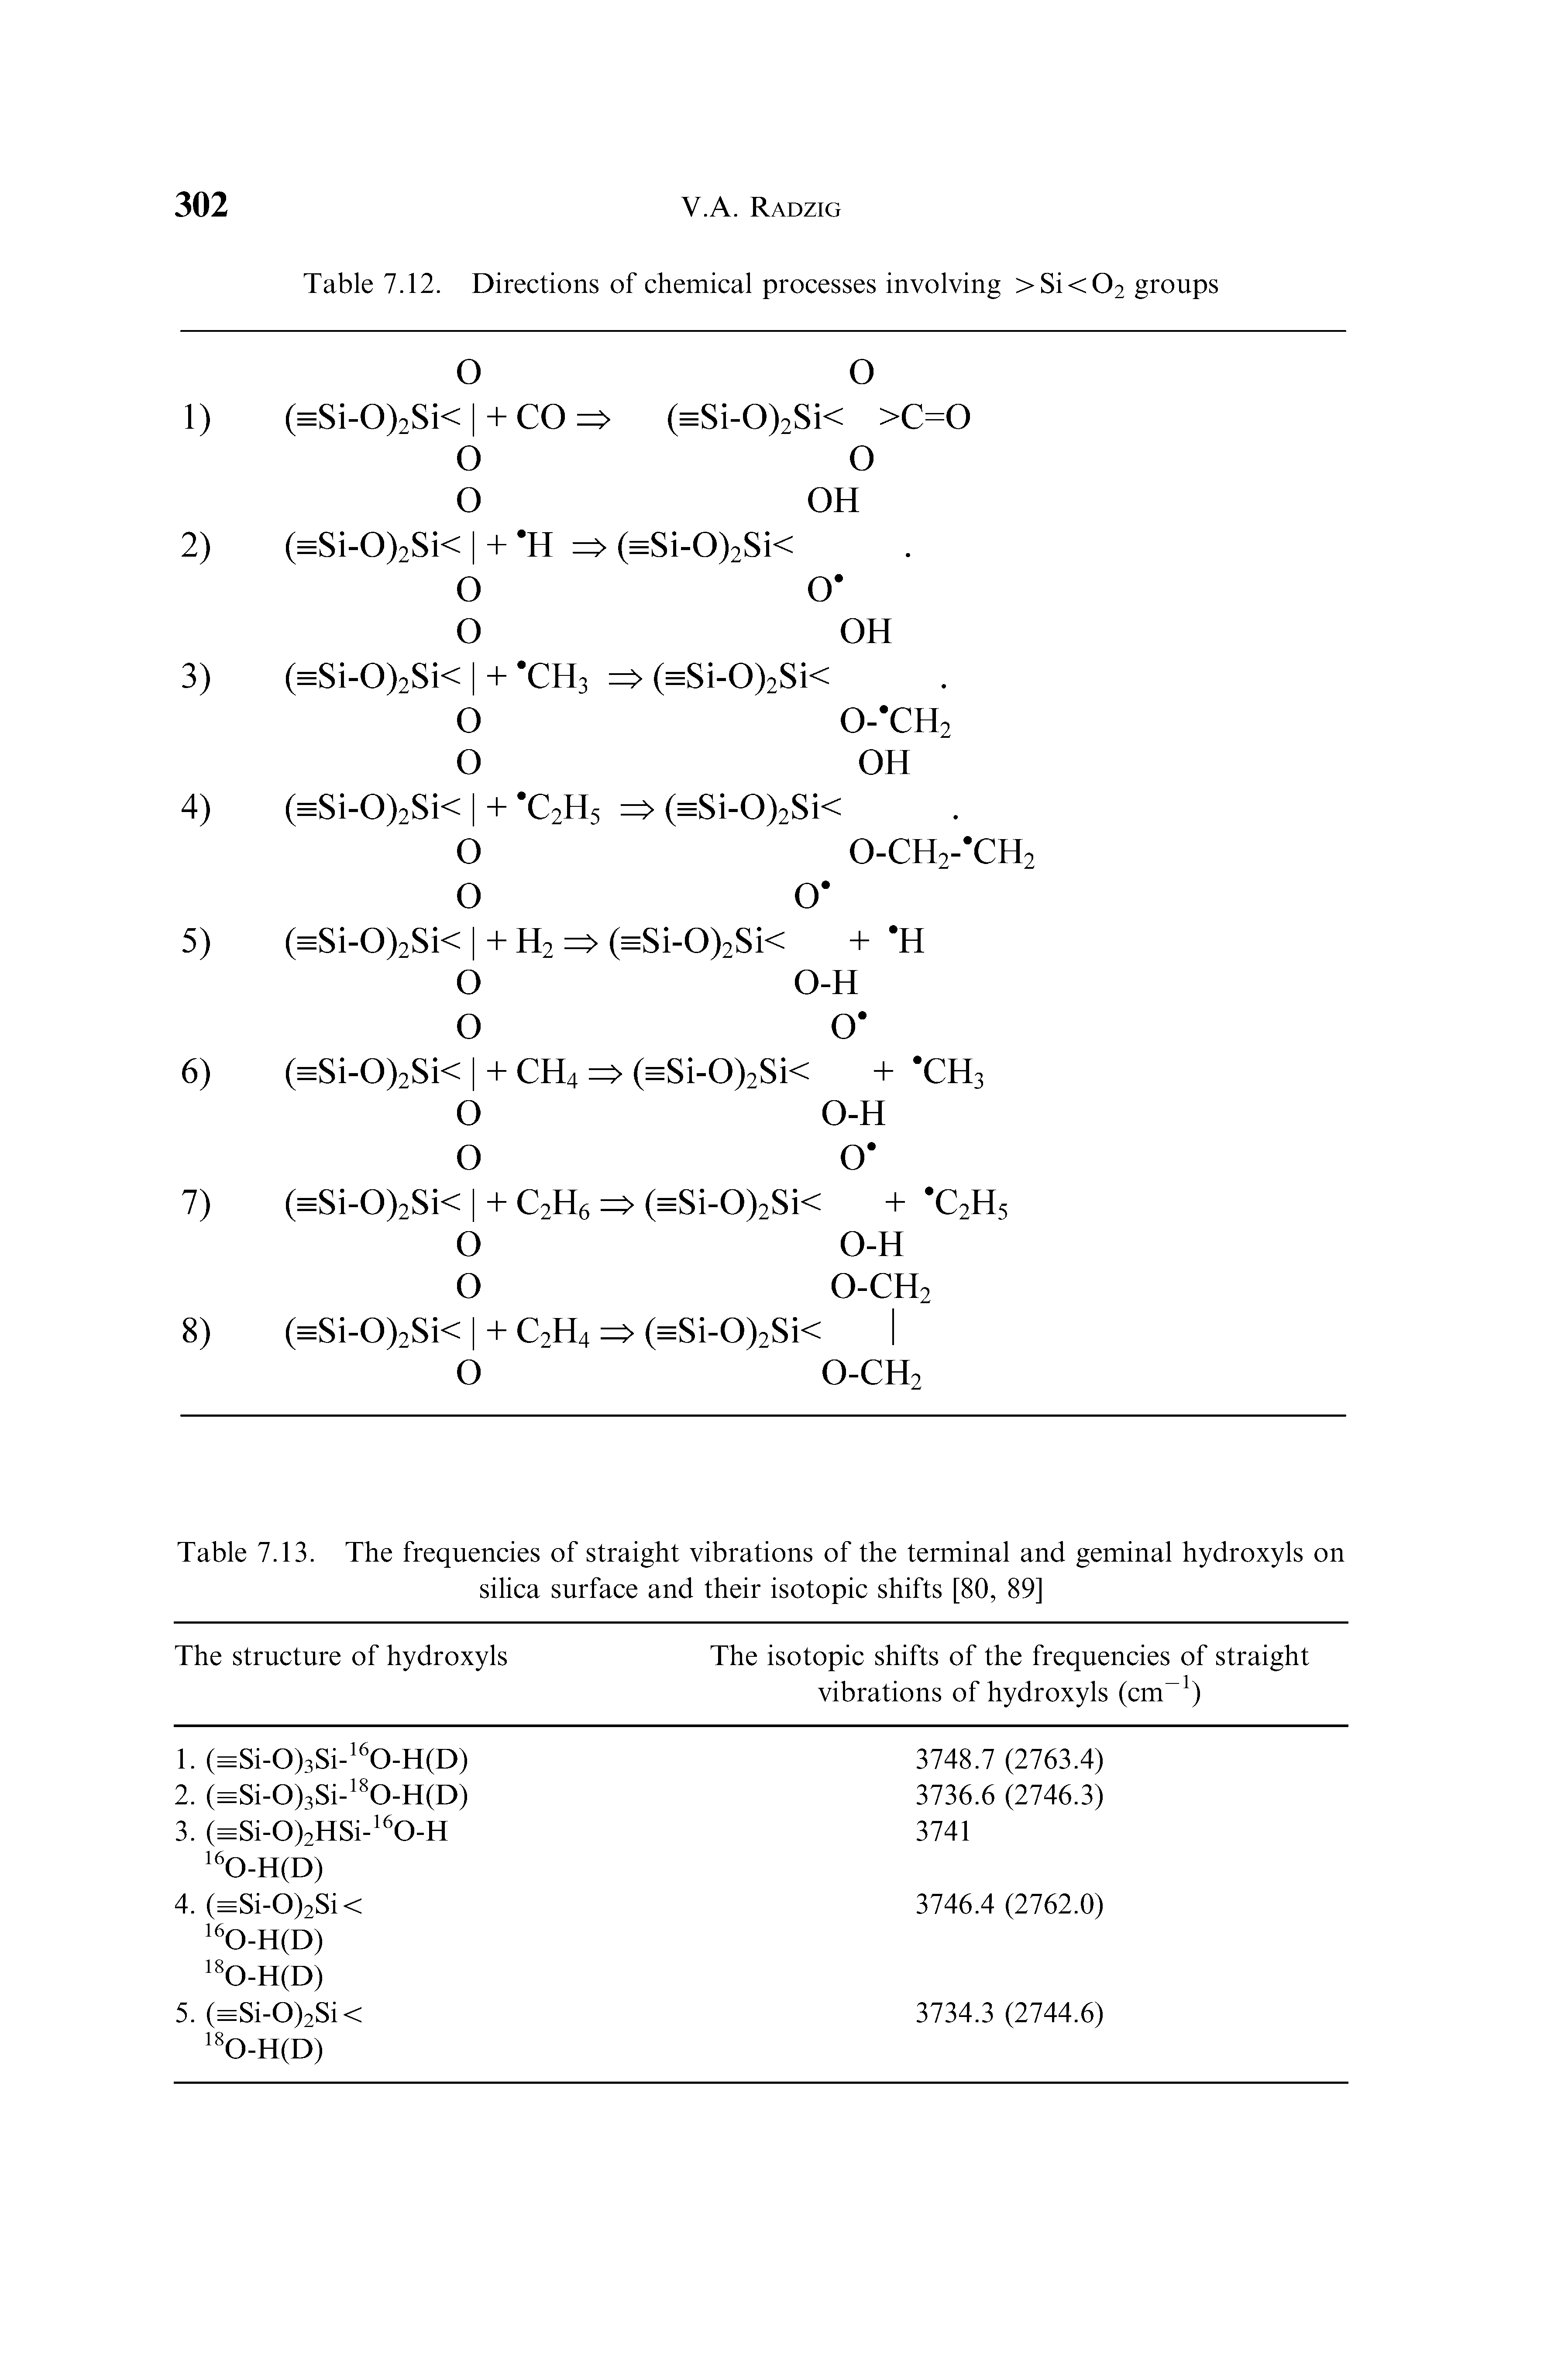 Table 7.13. The frequencies of straight vibrations of the terminal and geminal hydroxyls on silica surface and their isotopic shifts [80, 89]...